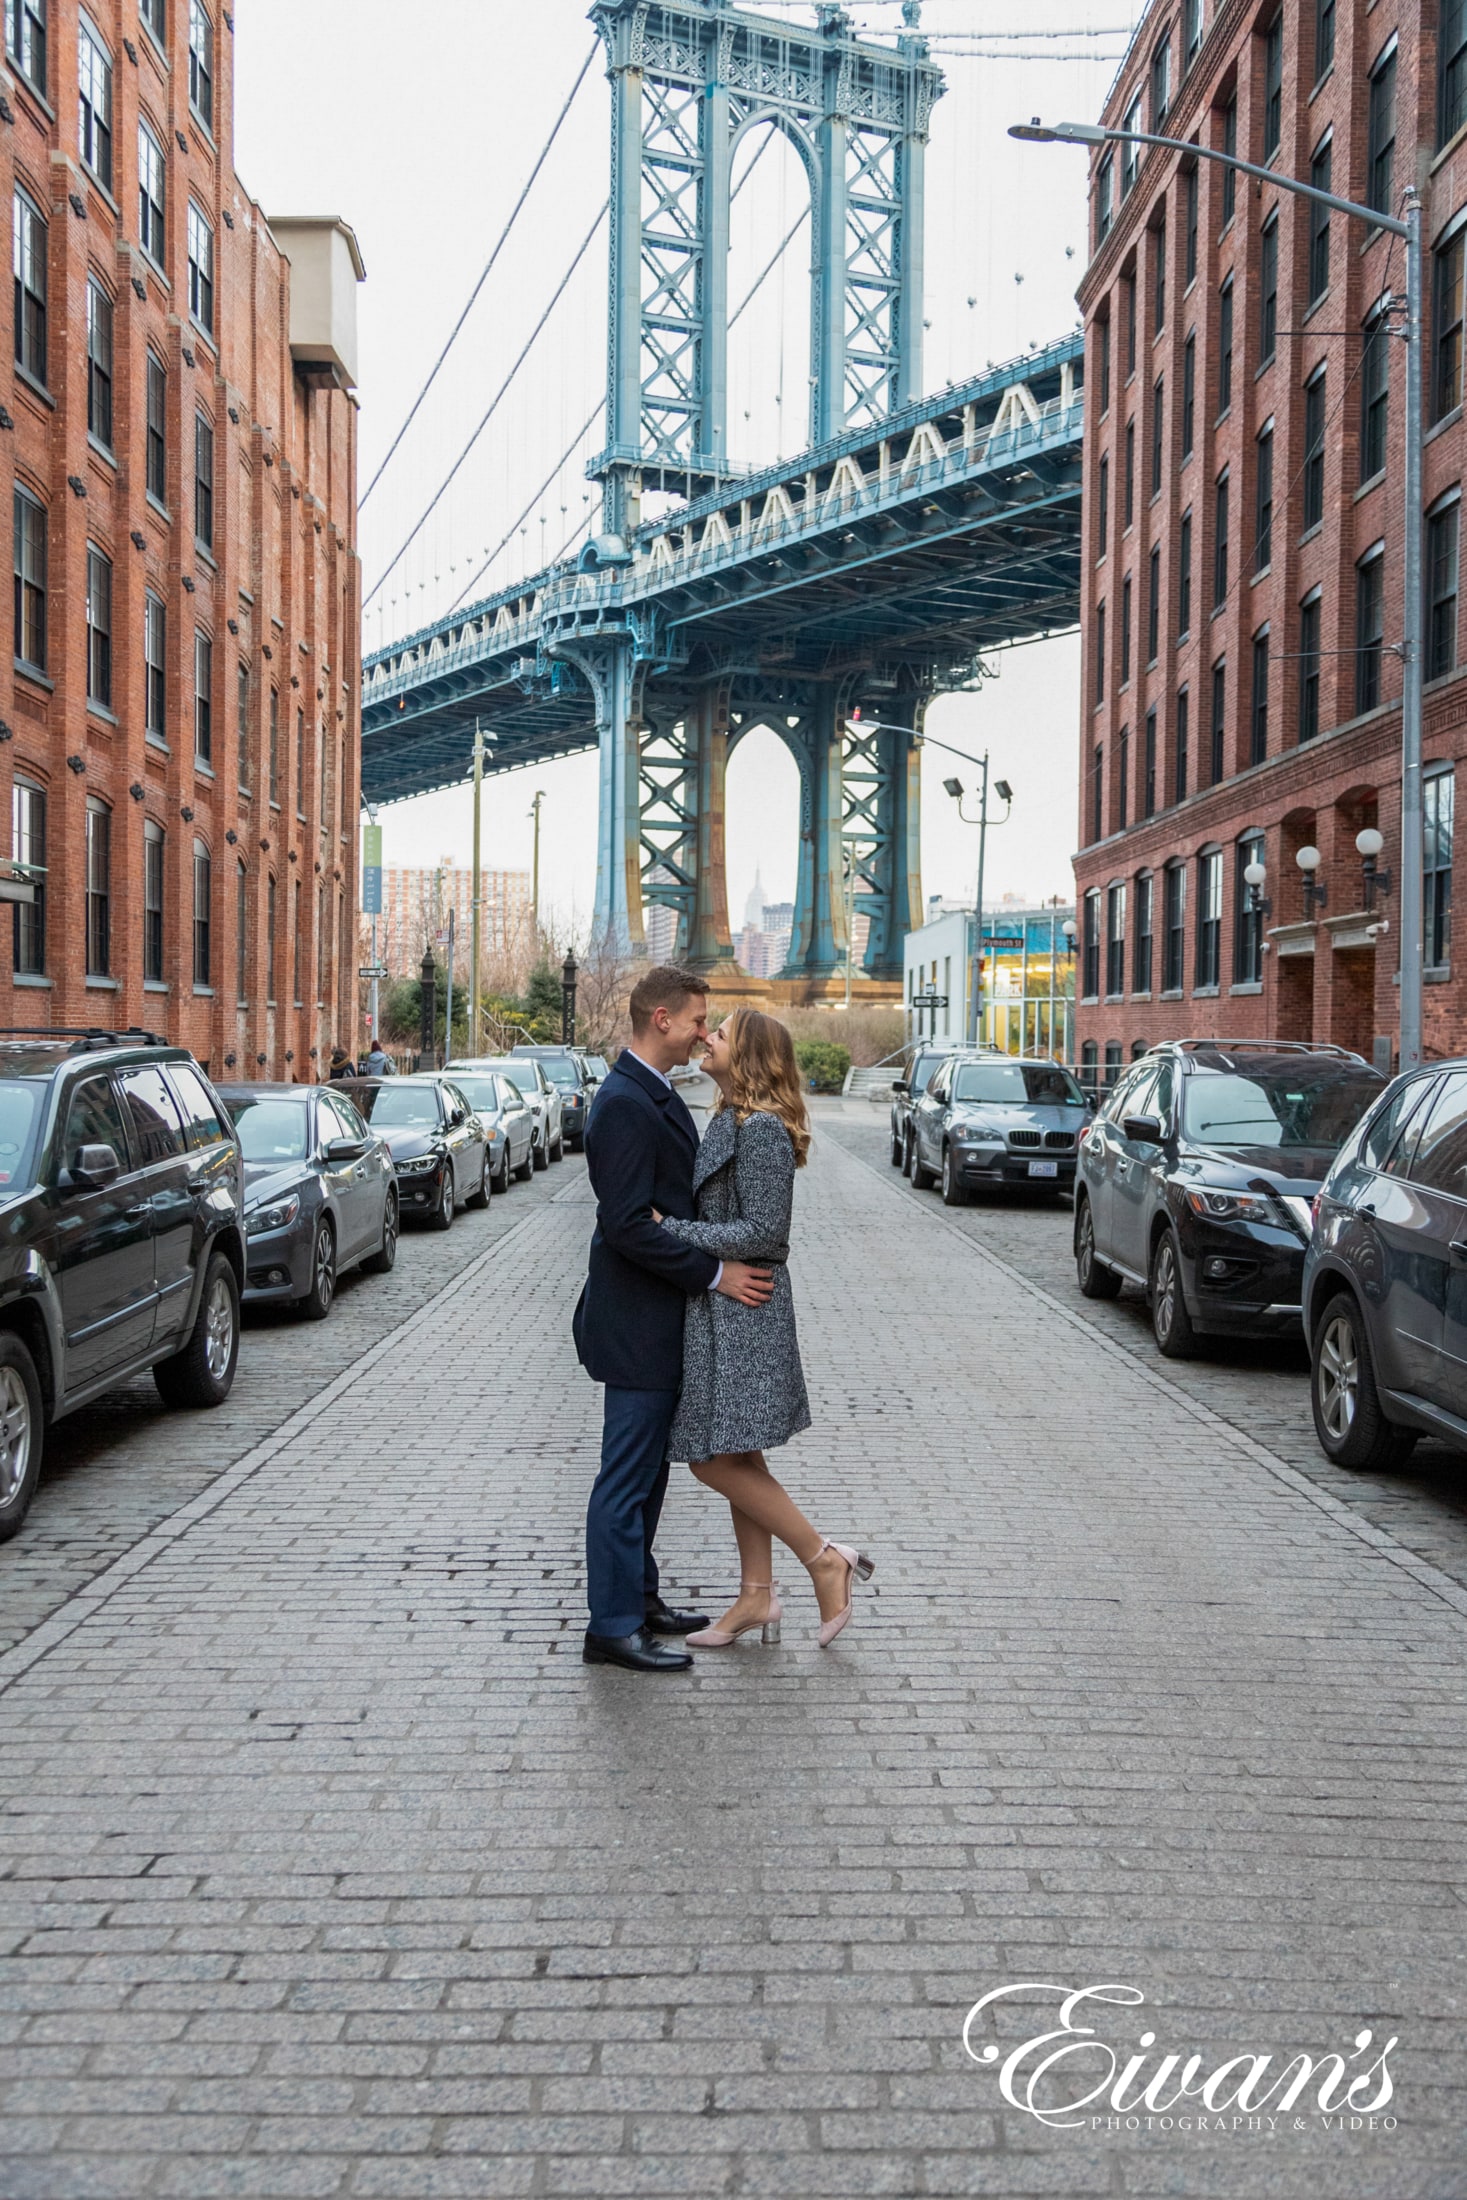 image of a couple in the city